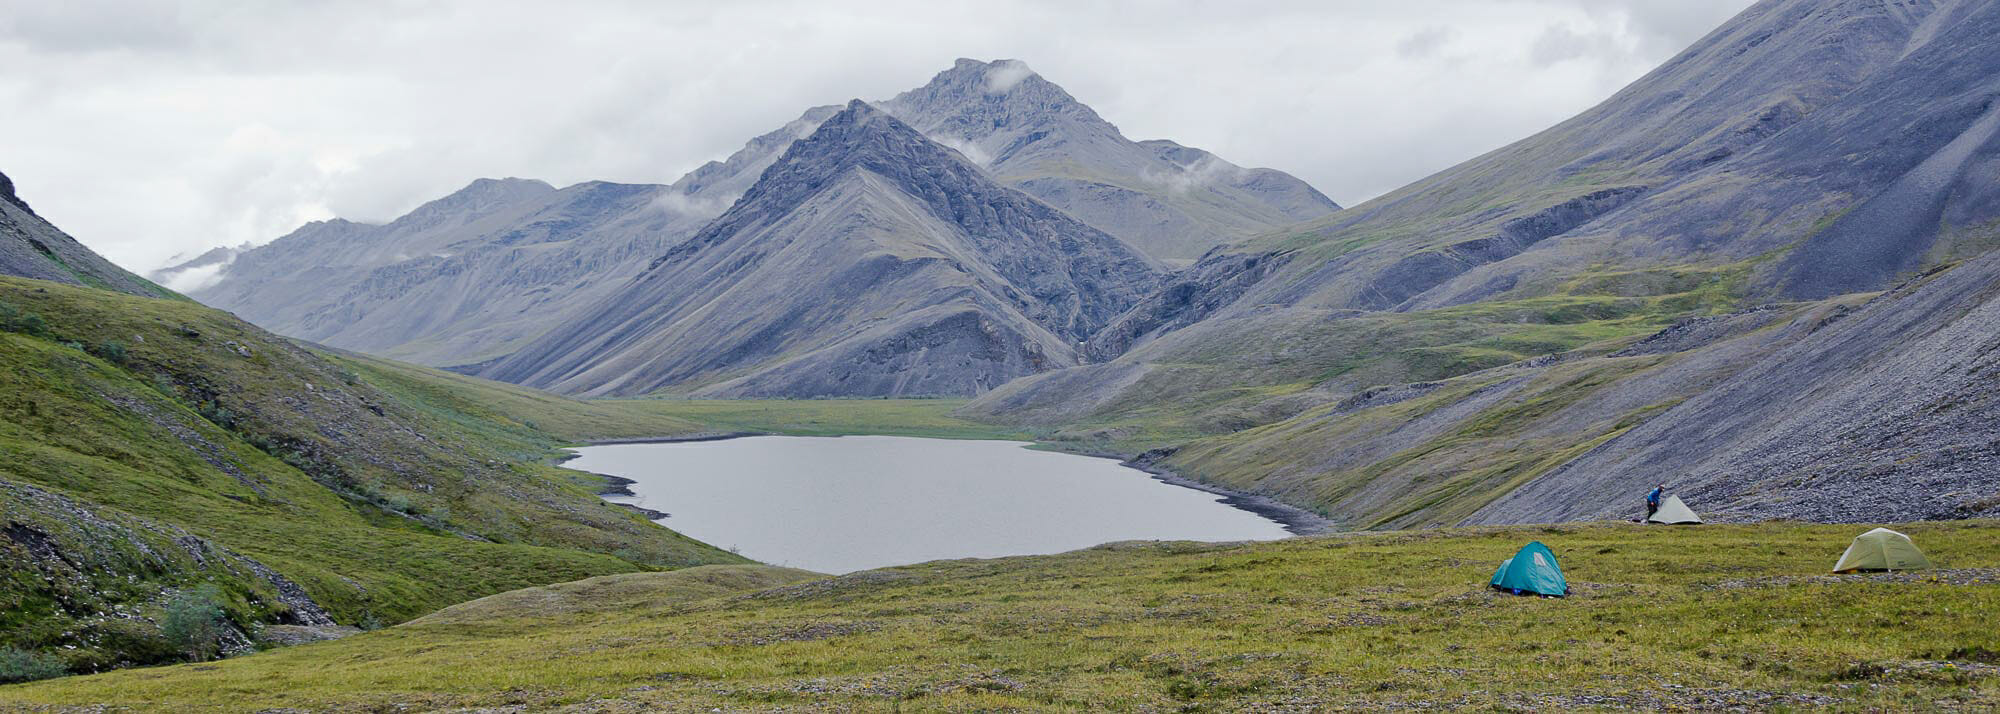 camping in the Brooks range within the Arctic National Wildlife Refuge Alaska